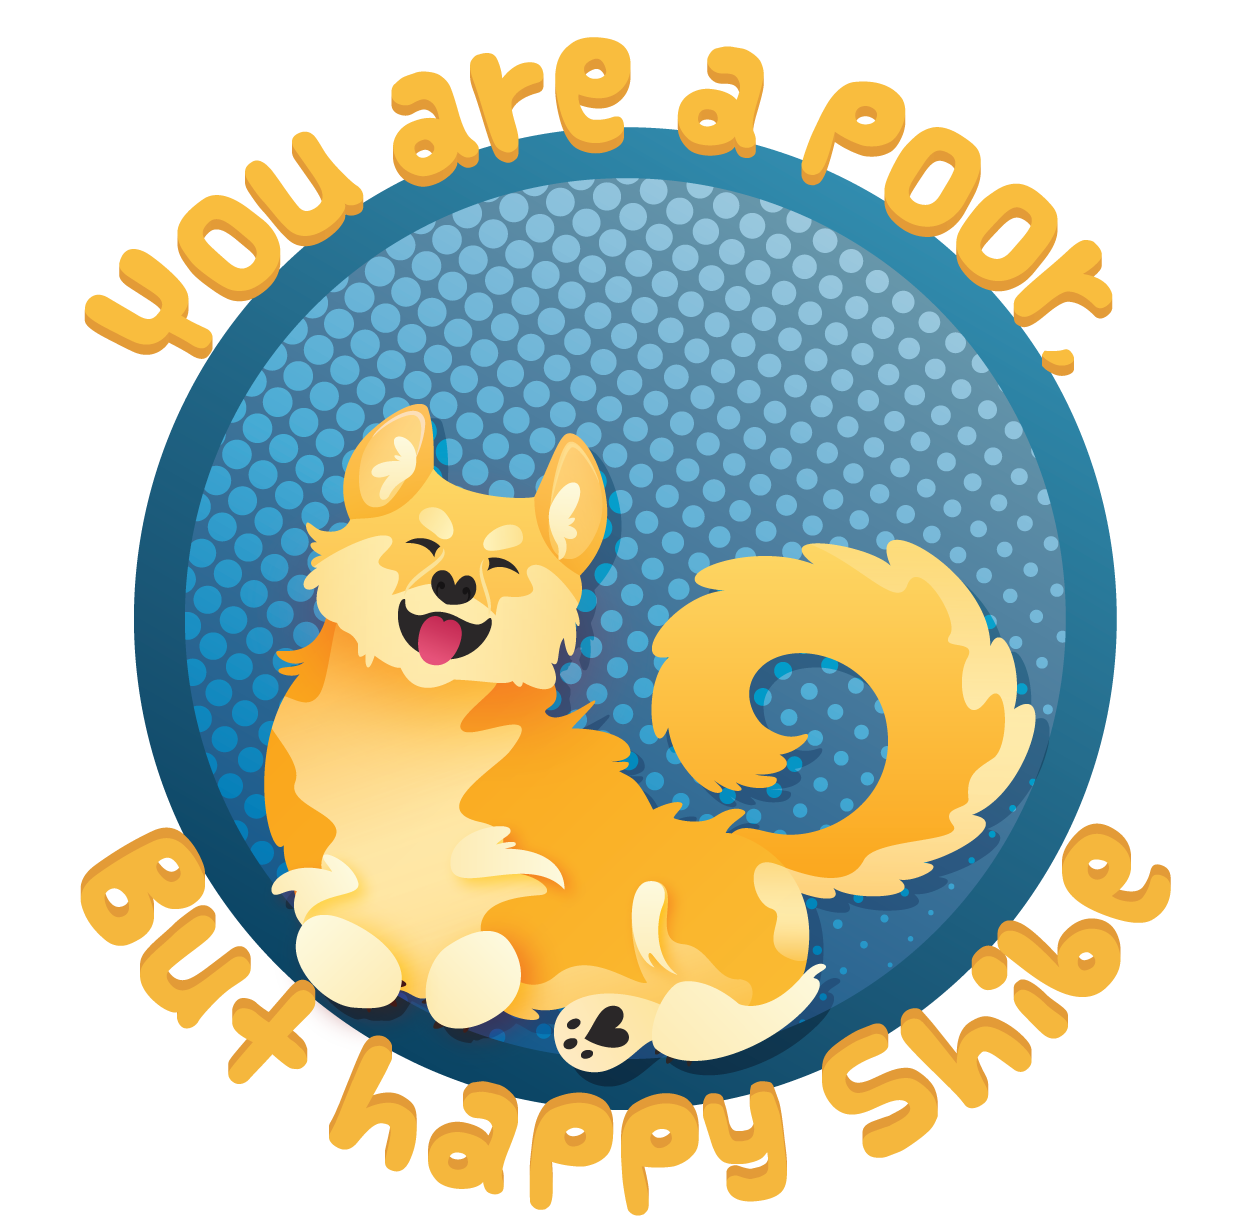 You are a poor, but happy shibe